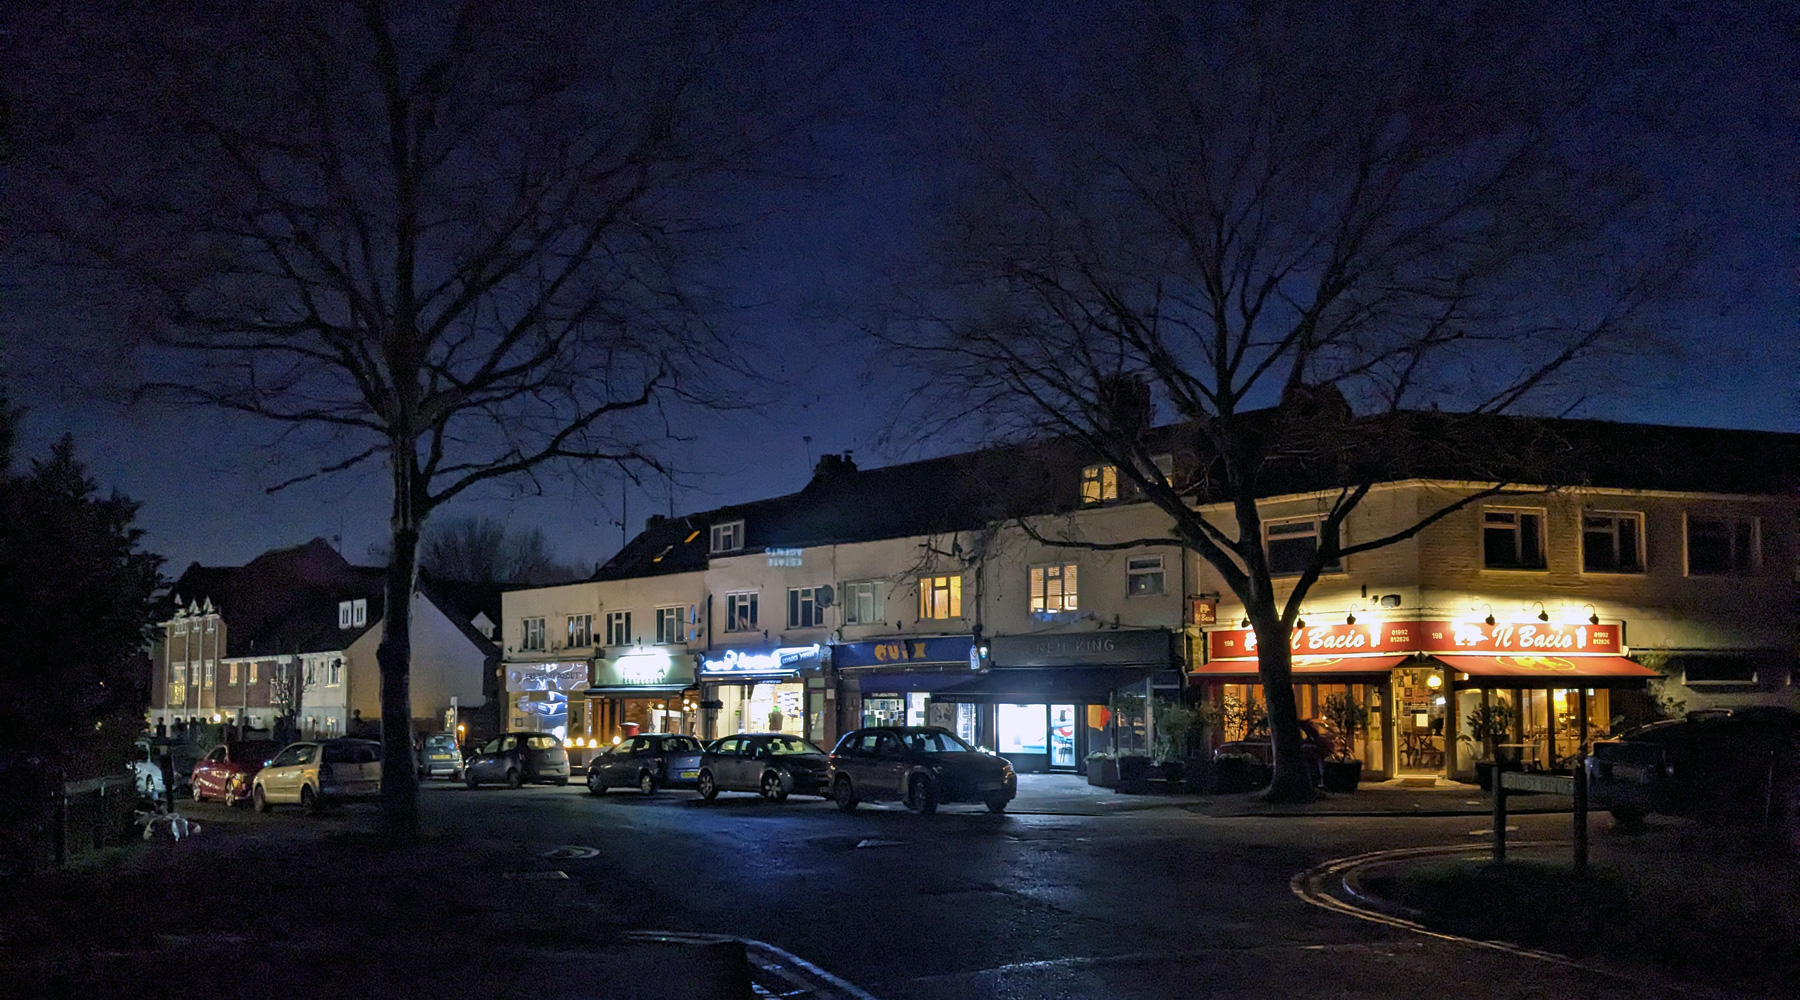 Theydon Bois – the town with no street lights